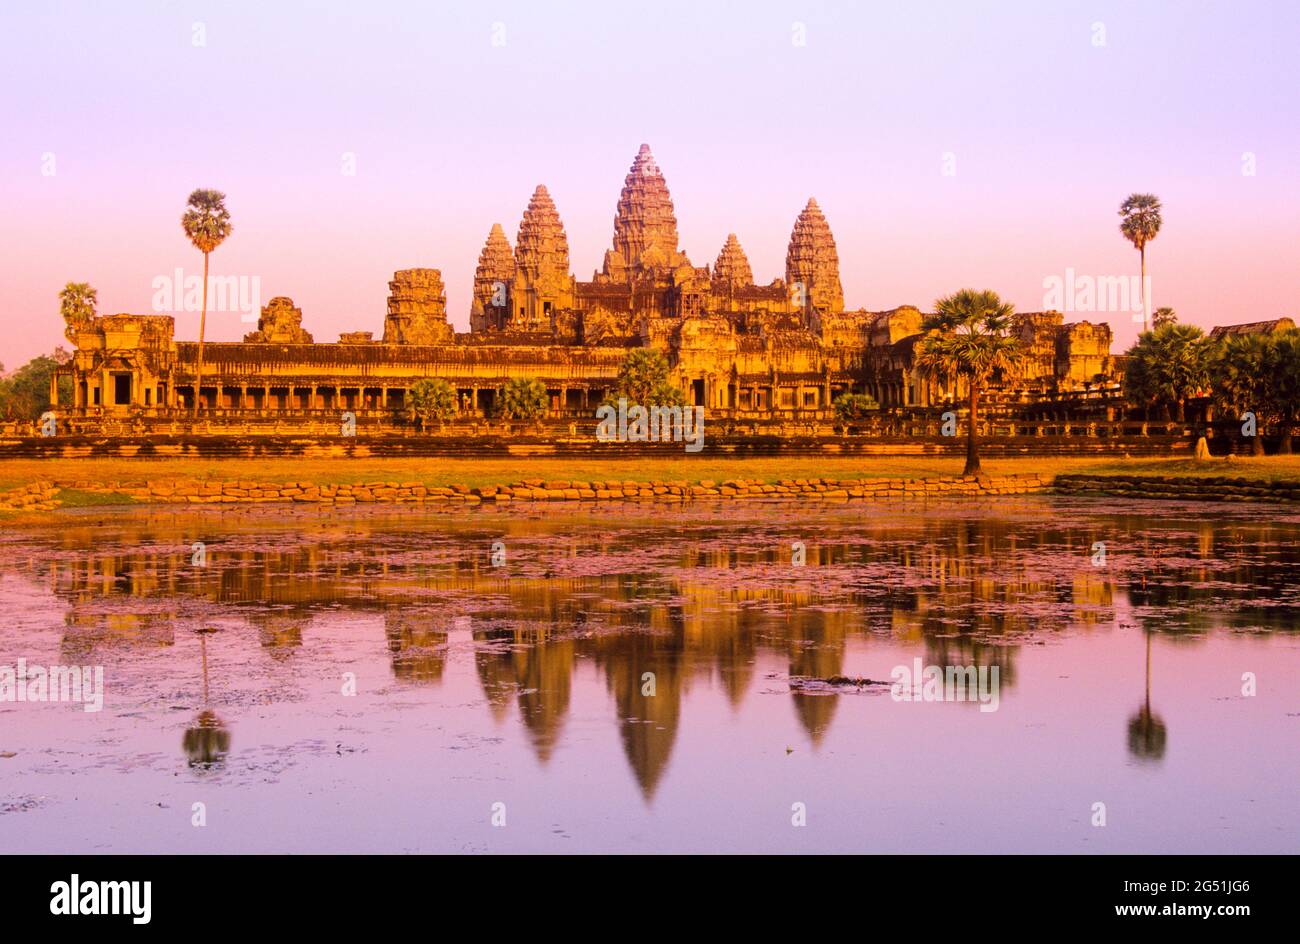 Angkor Wat temple reflecting in water at Sunset, Siem Reap, Cambodia Stock Photo